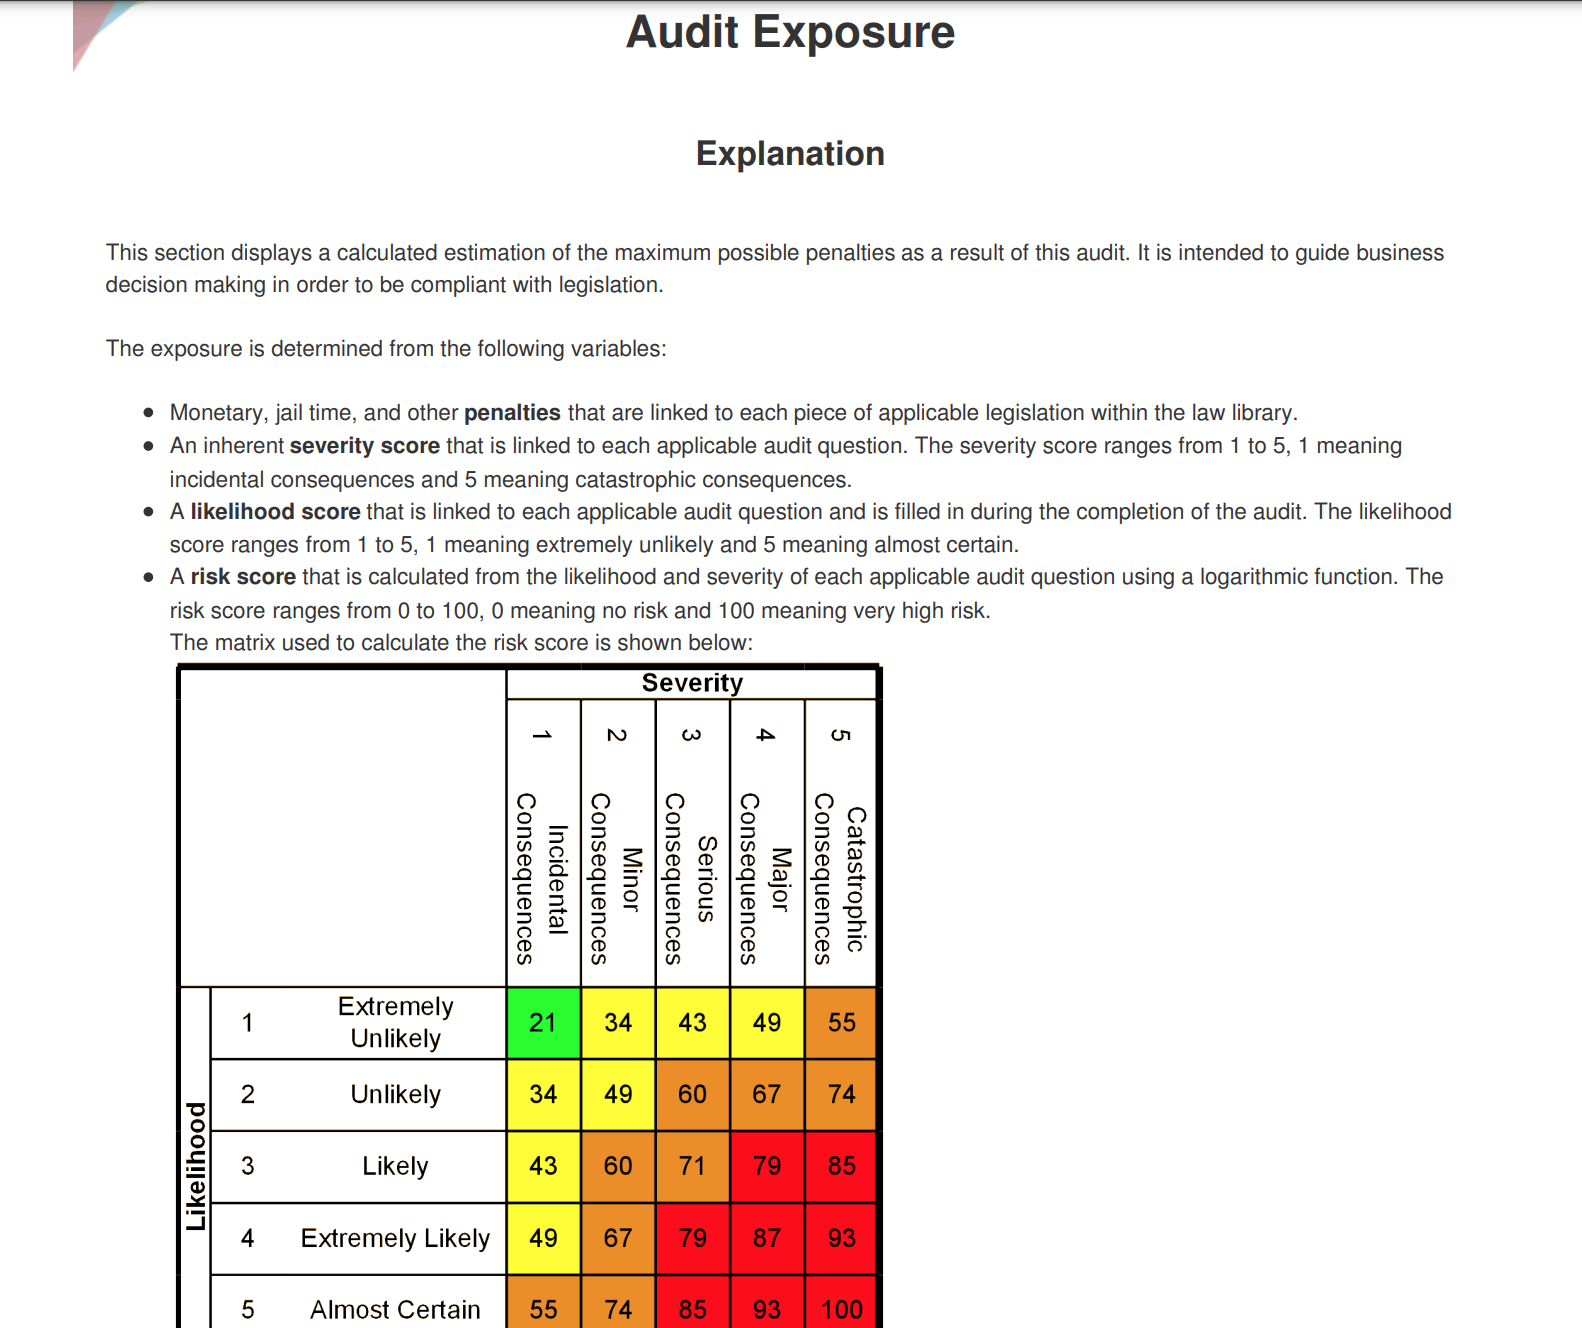 Non-compliance exposure value based on the results of any internal or external legal audit. Key indicator of the actual potential monetary or criminal sentence exposure of the company and or executives.